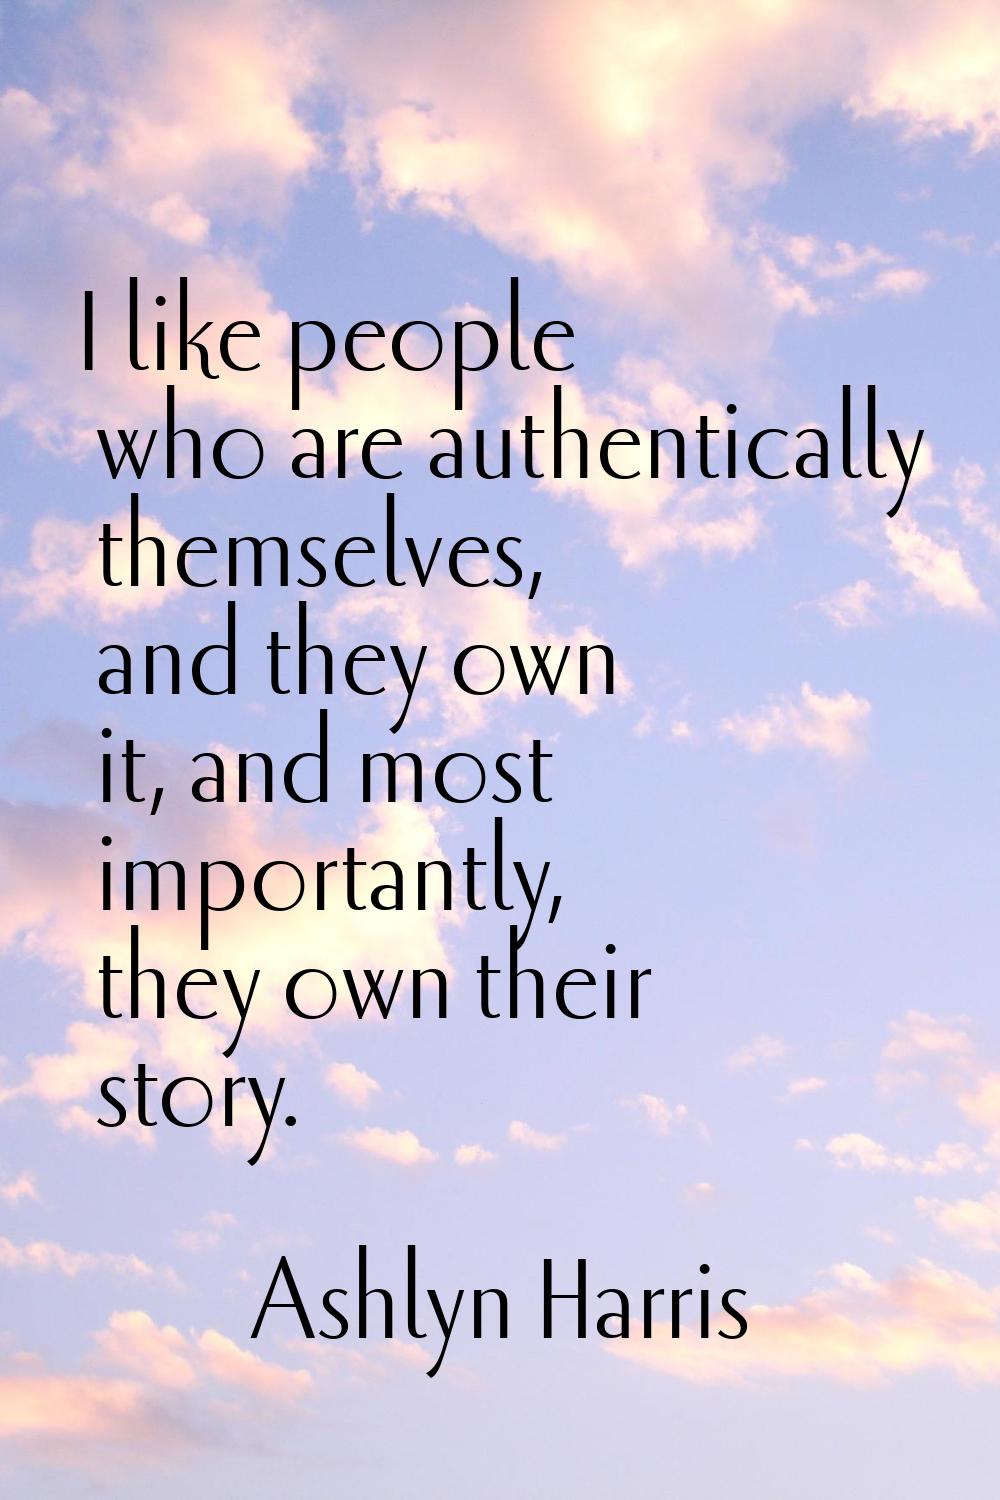 I like people who are authentically themselves, and they own it, and most importantly, they own the